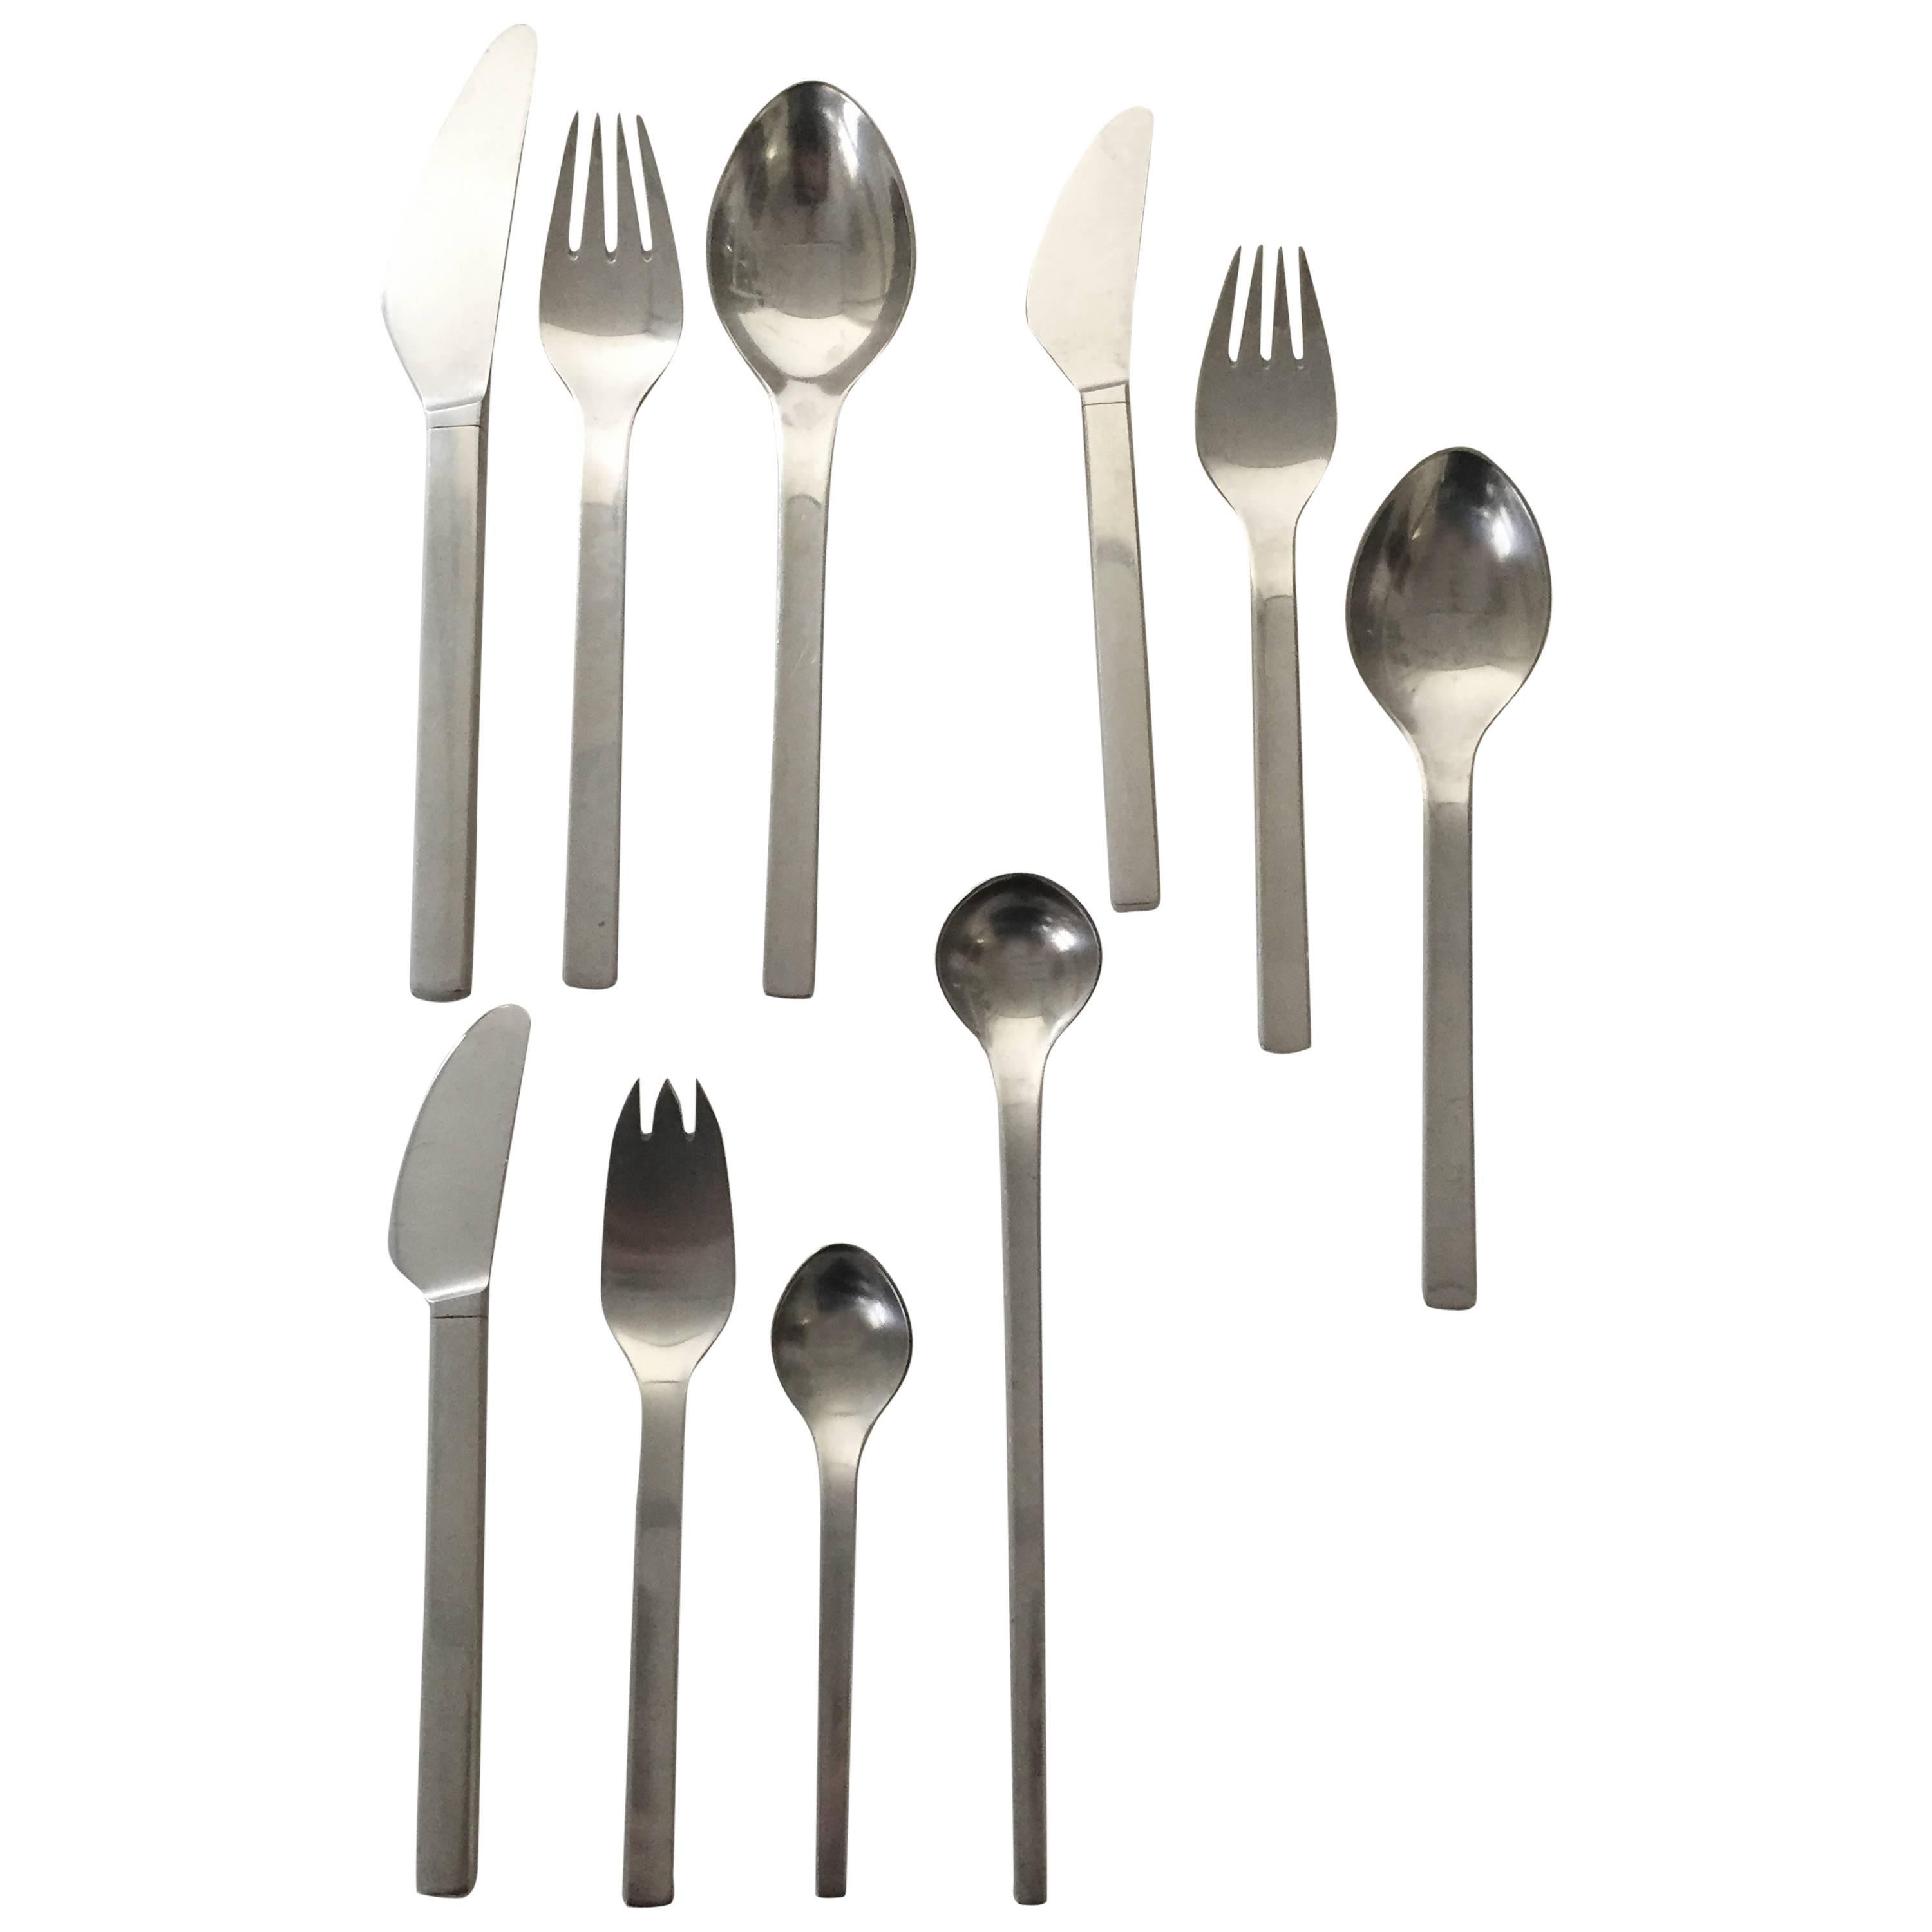 Georg Jensen Stainless Steel Flatware Tuja Tanaguil Set of 72 Pieces